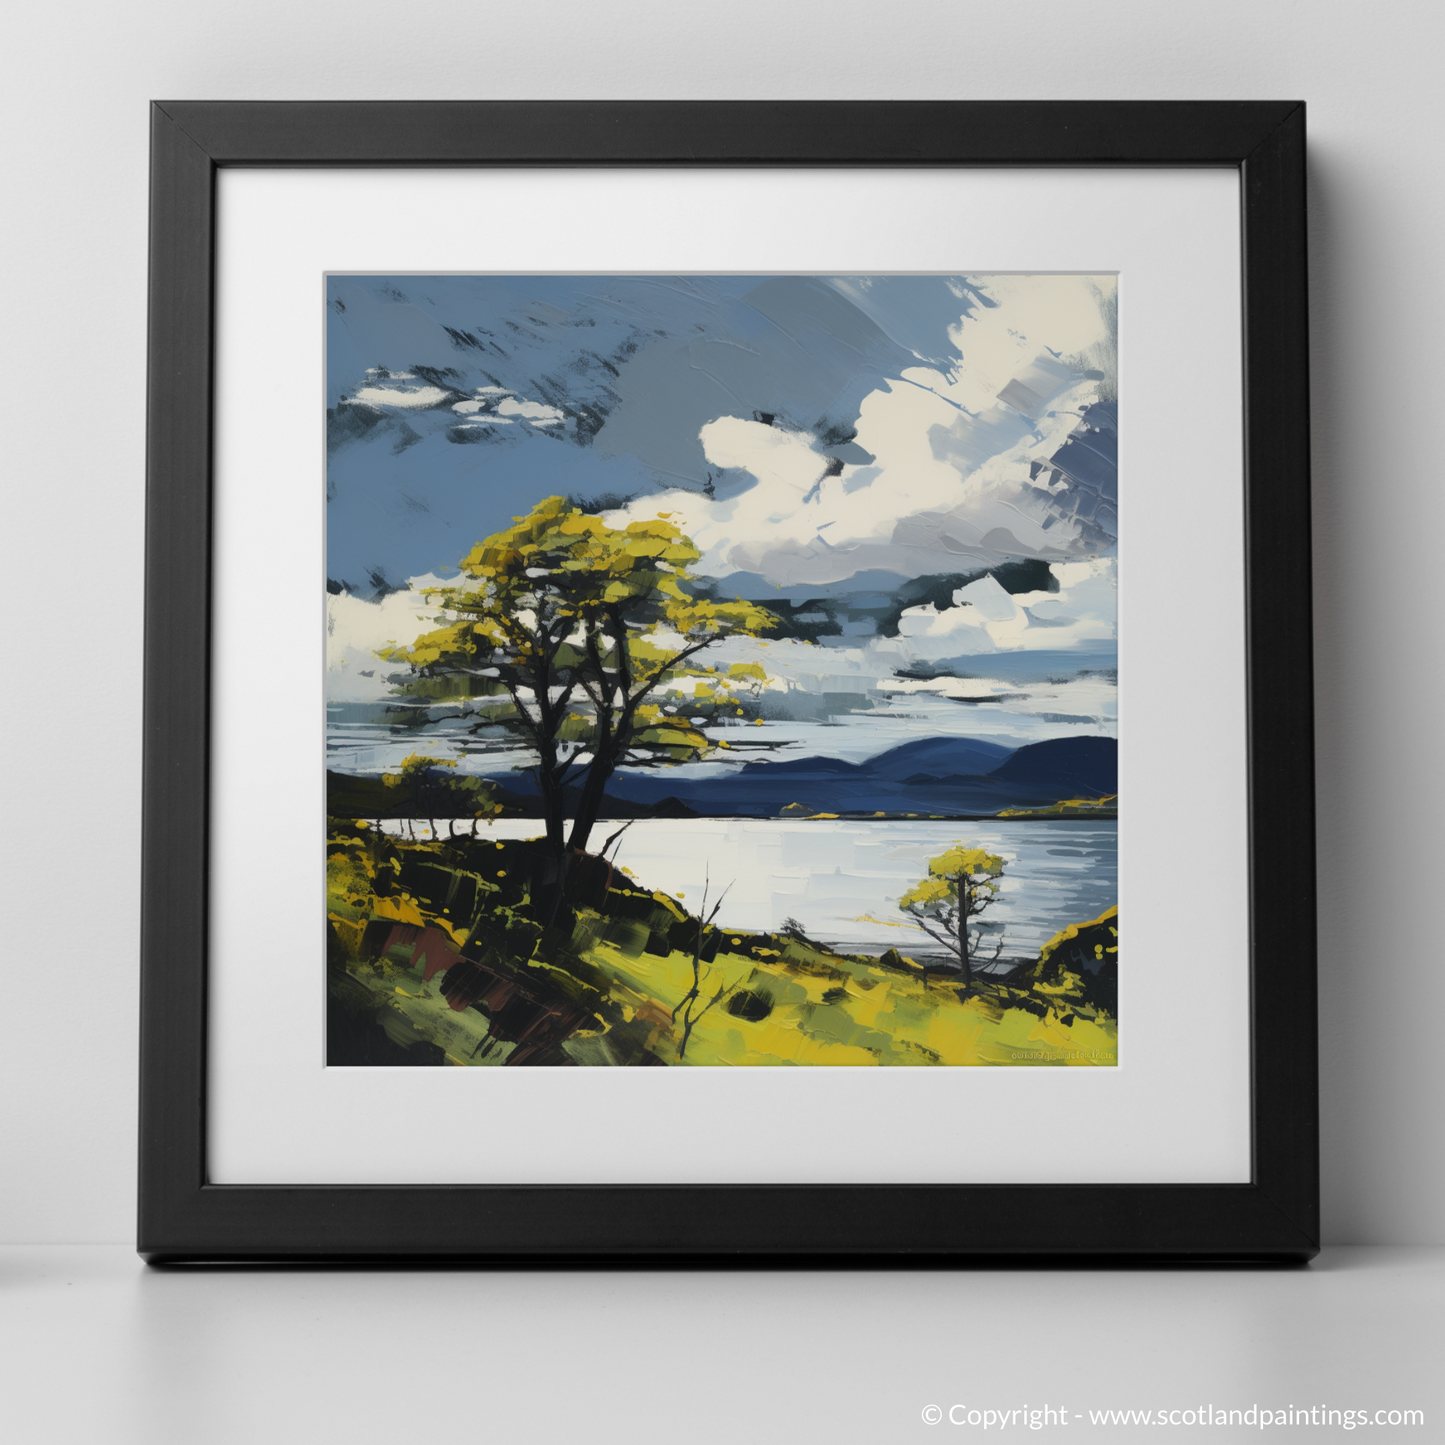 Art Print of Loch Lomond in summer with a black frame